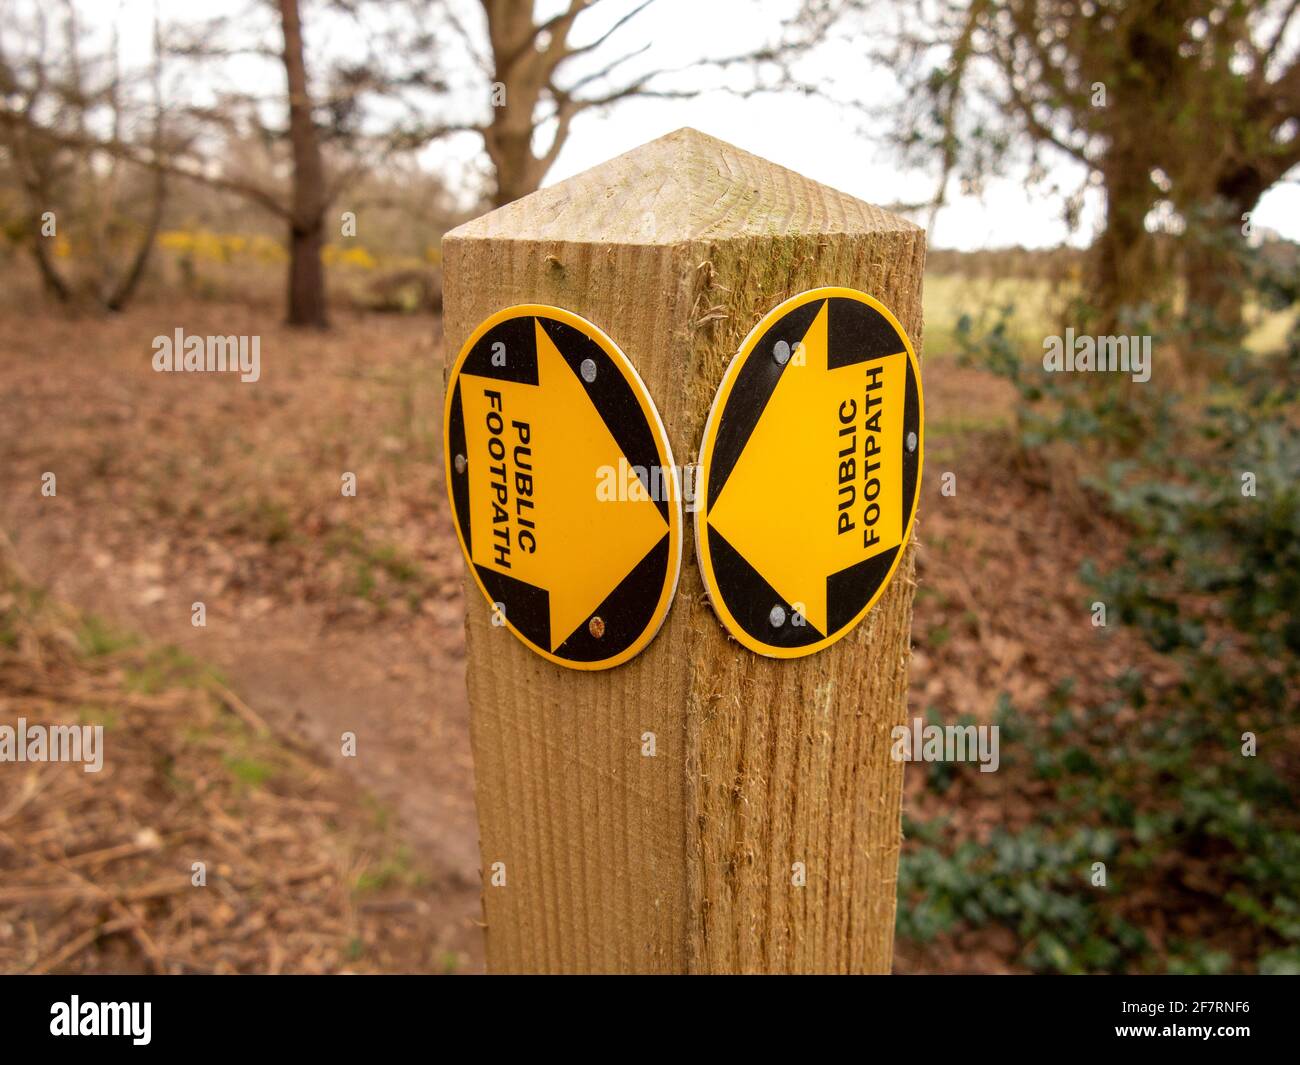 A new public footpath sign in the form of yellow arrows on discs mounted on a wooden post Stock Photo